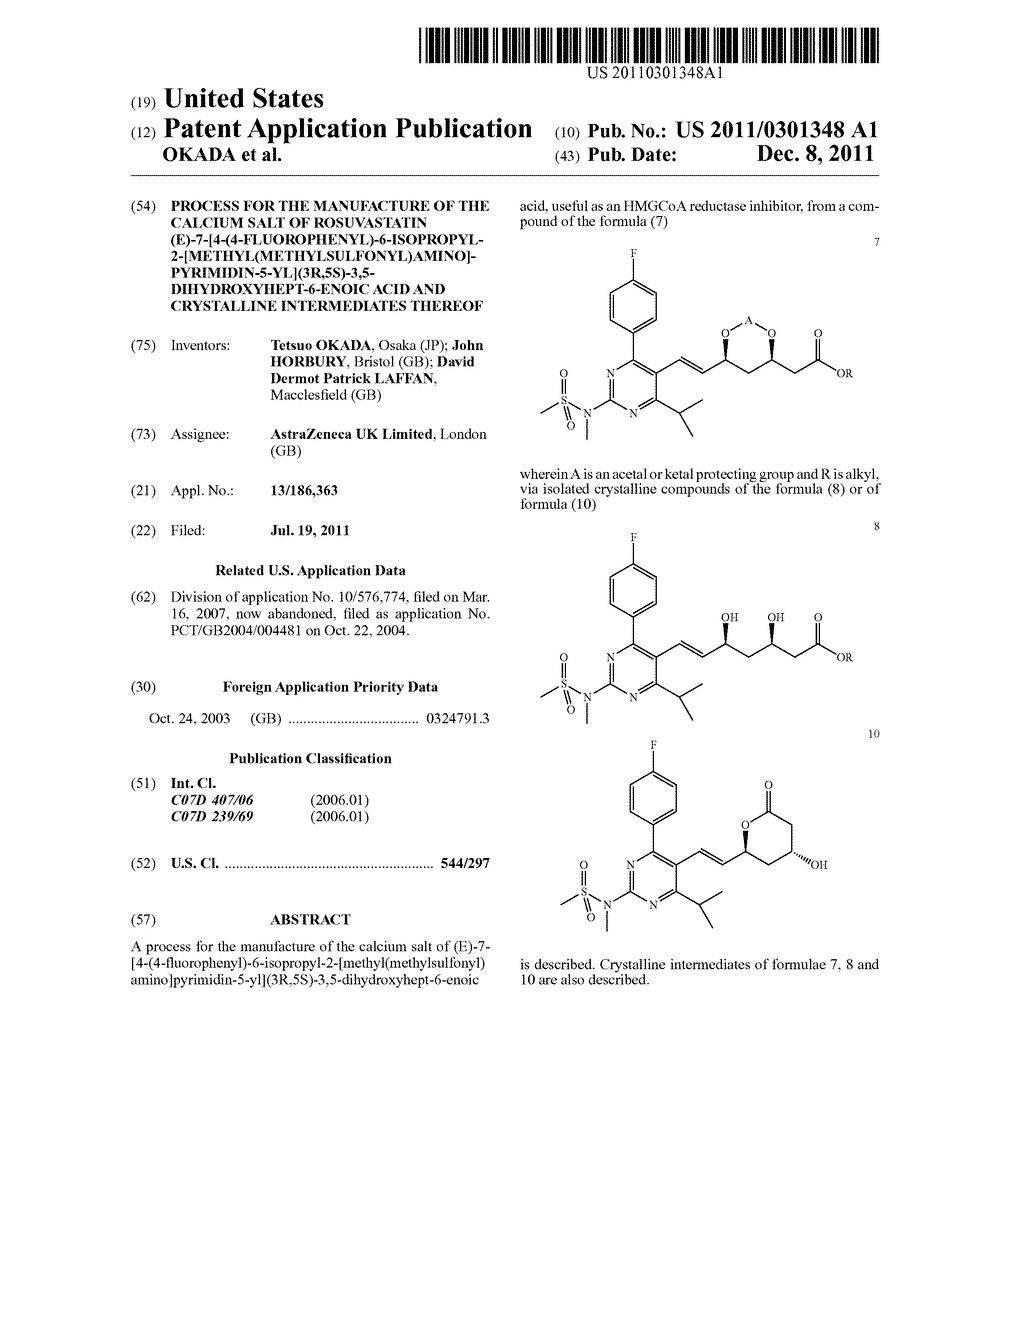 Process for the Manufacture of the Calcium Salt of Rosuvastatin     (E)-7-[4-(4-Fluorophenyl)-6-Isopropyl-2-[Methyl(Methylsulfonyl)Amino]-Pyr-    imidin-5-yl](3R,5S)-3,5-Dihydroxyhept-6-Enoic Acid and Crystalline     Intermediates Thereof - diagram, schematic, and image 01